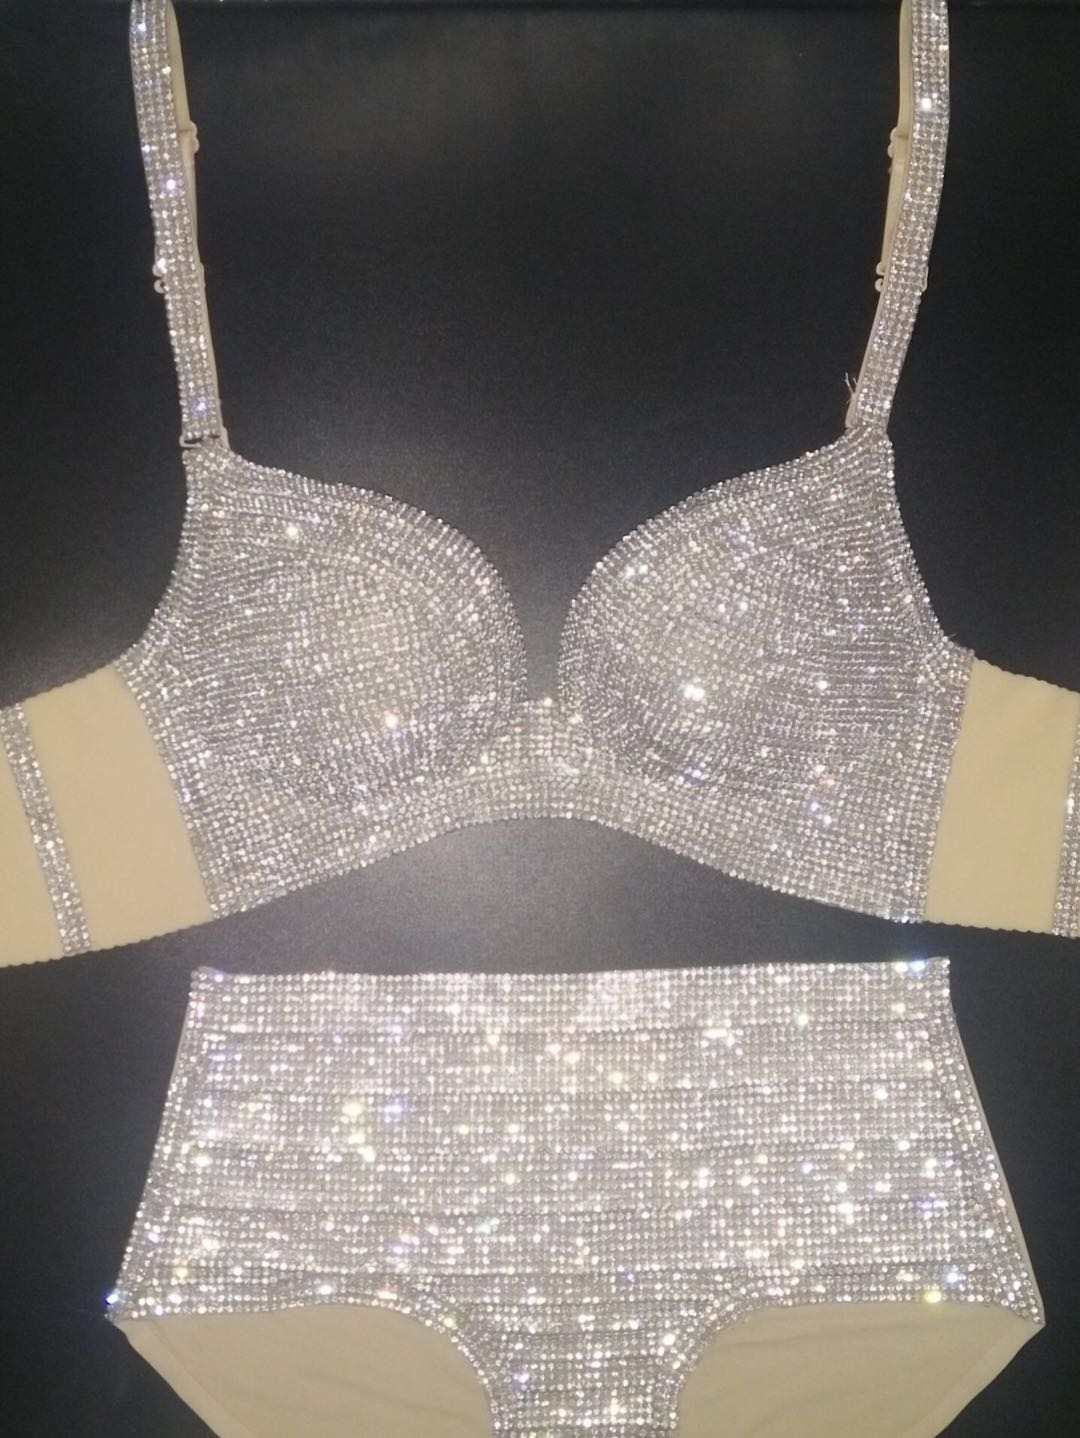 DIY Rhinestone Bra Tutorial - Personalizing Your Lingerie with